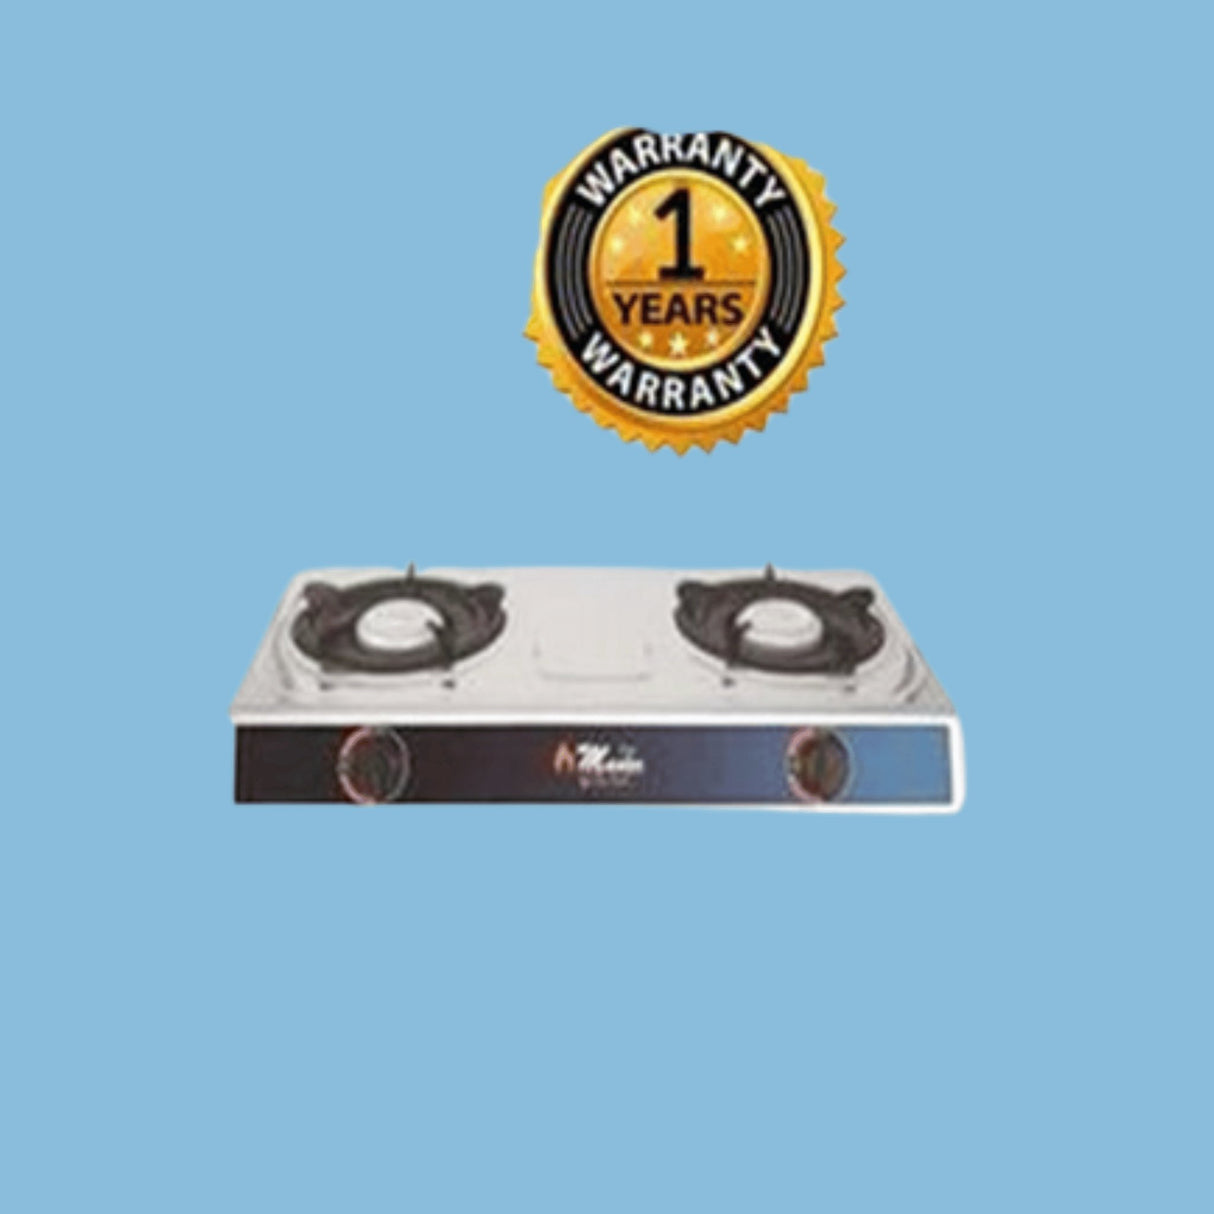 Electro Master Stainless Steel Double Burner Gas Stove - KWT Tech Mart